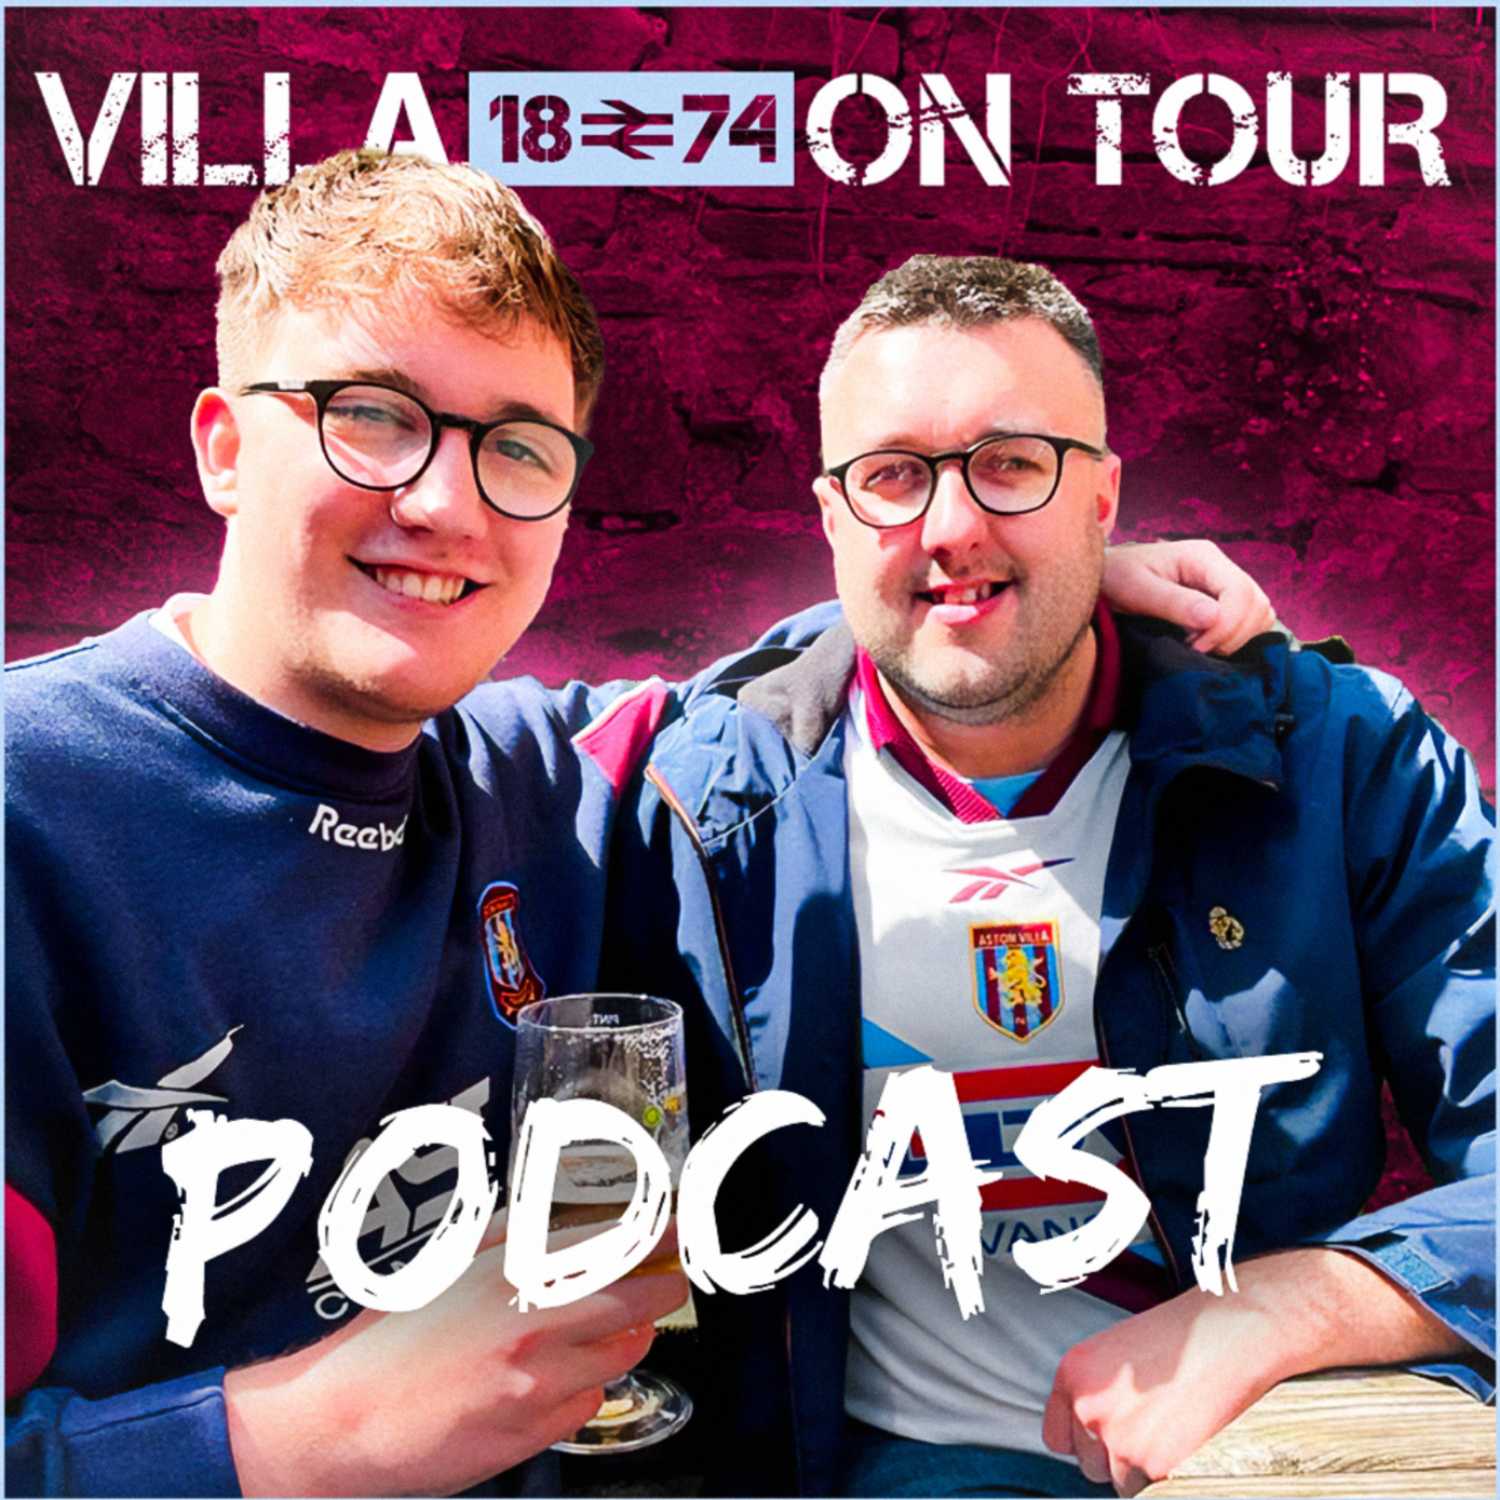 Villa's title charge continues after beating City and Arsenal and a trip Bosnia awaits 🇧🇦